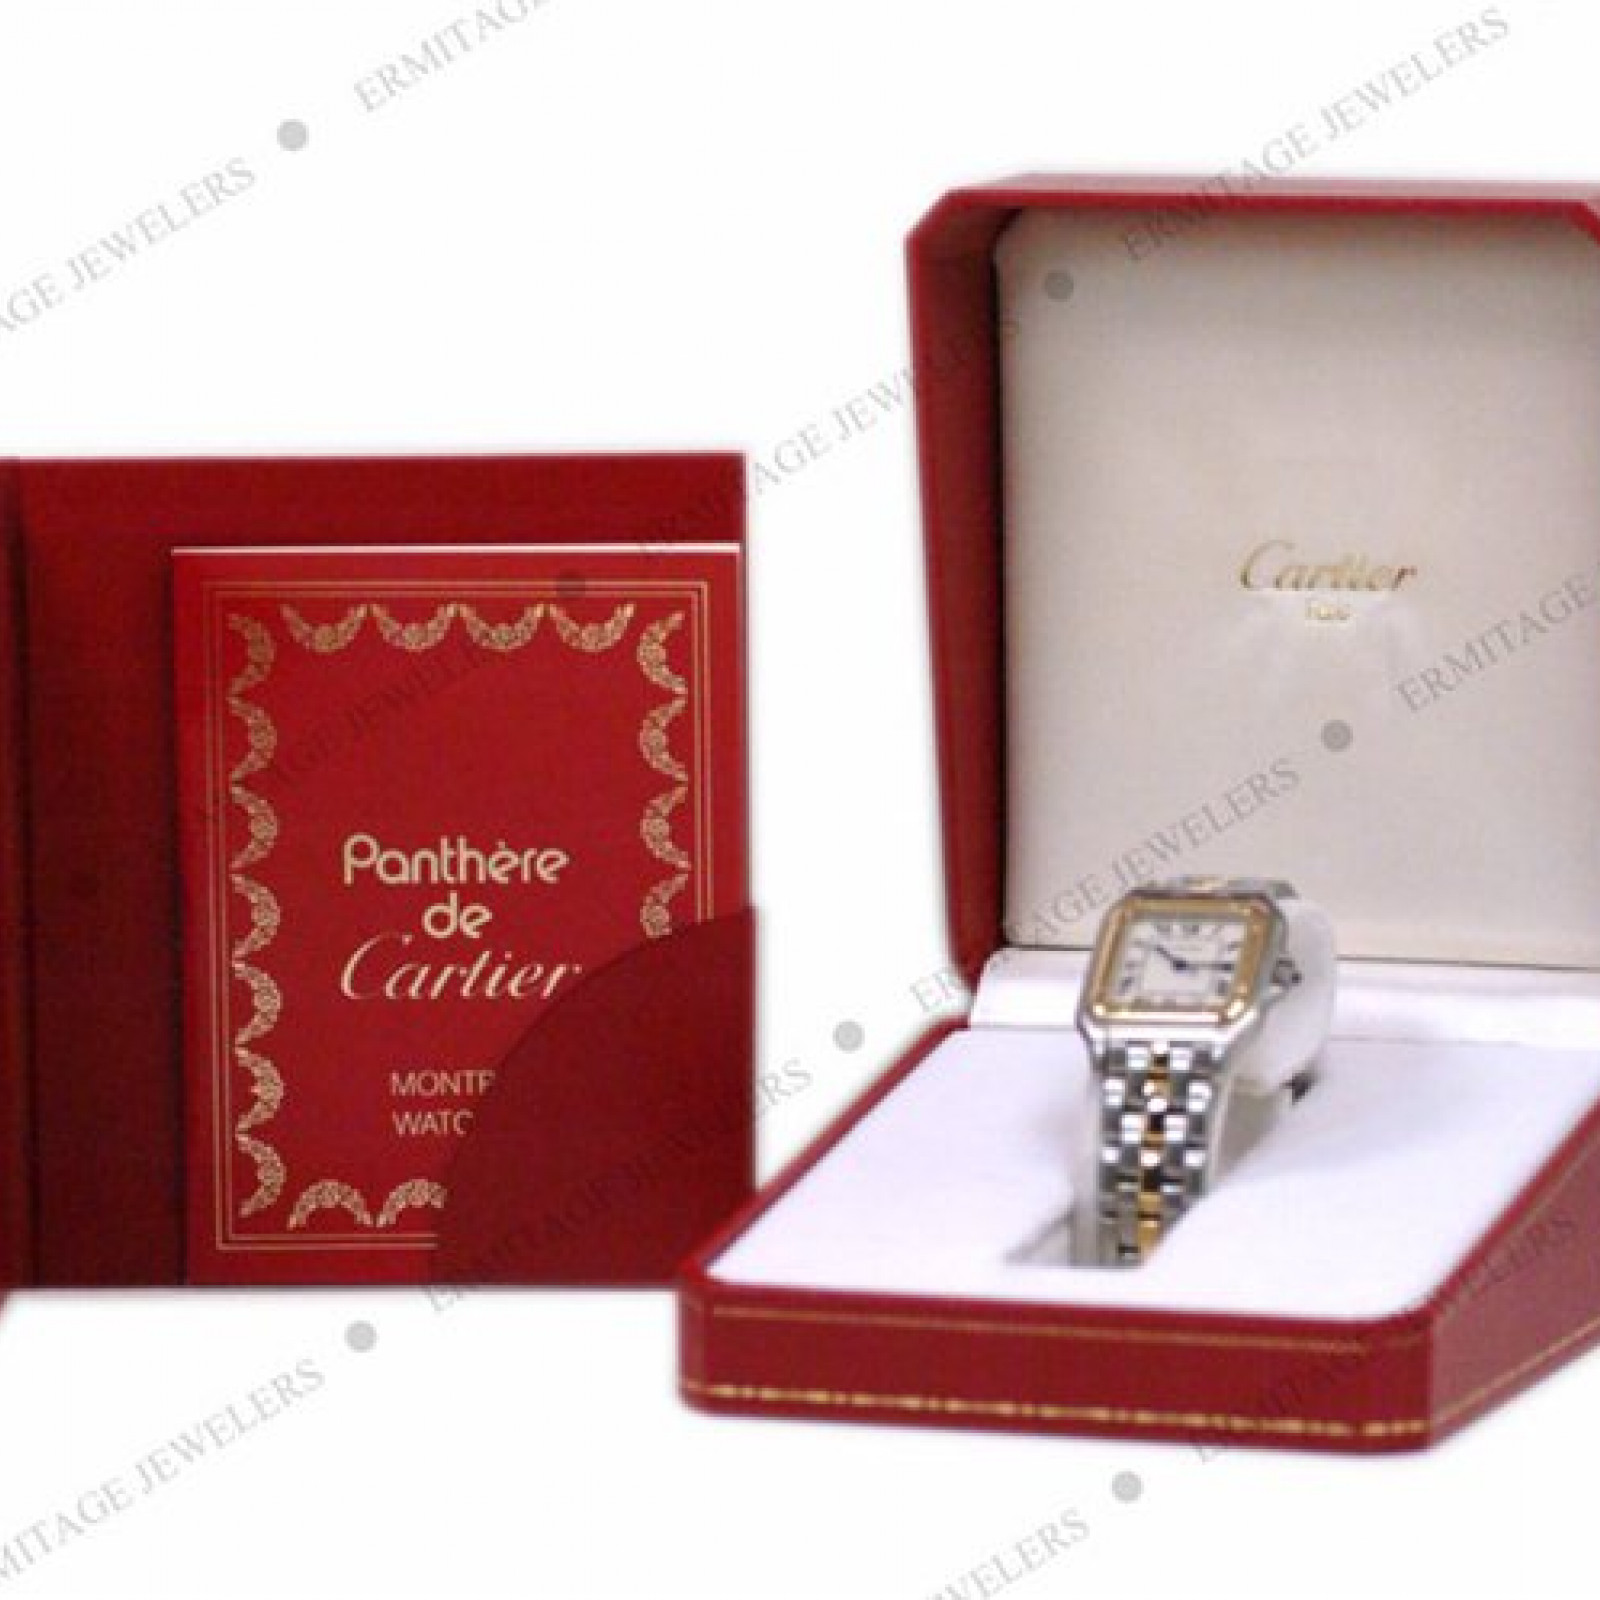 Cartier Tank Panthere 8299 Gold & Steel